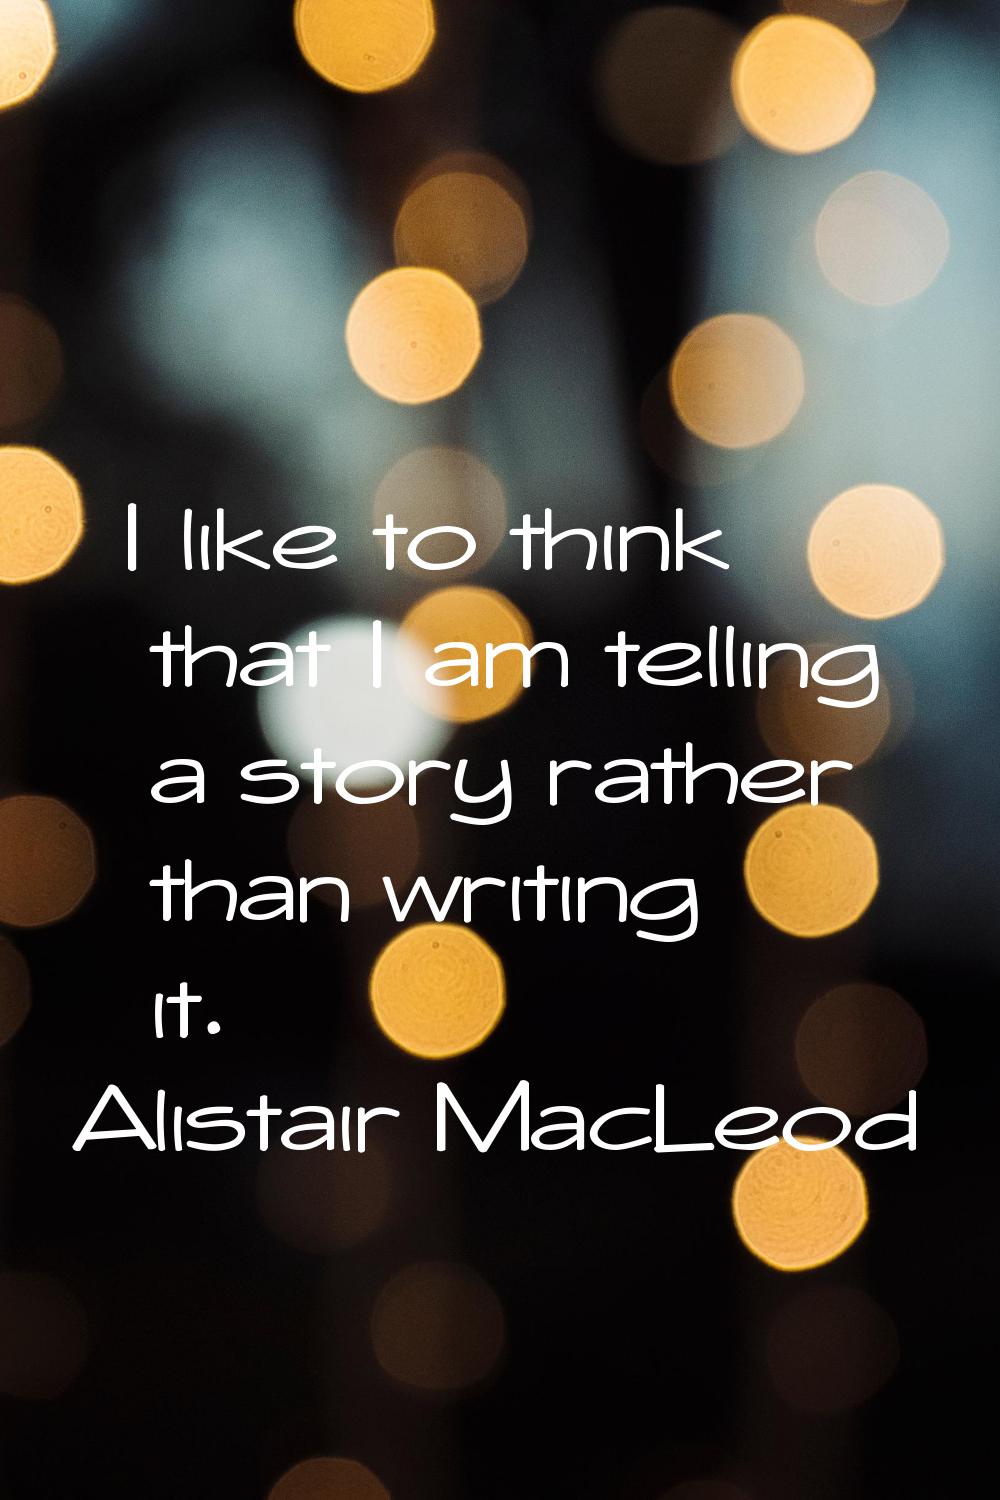 I like to think that I am telling a story rather than writing it.